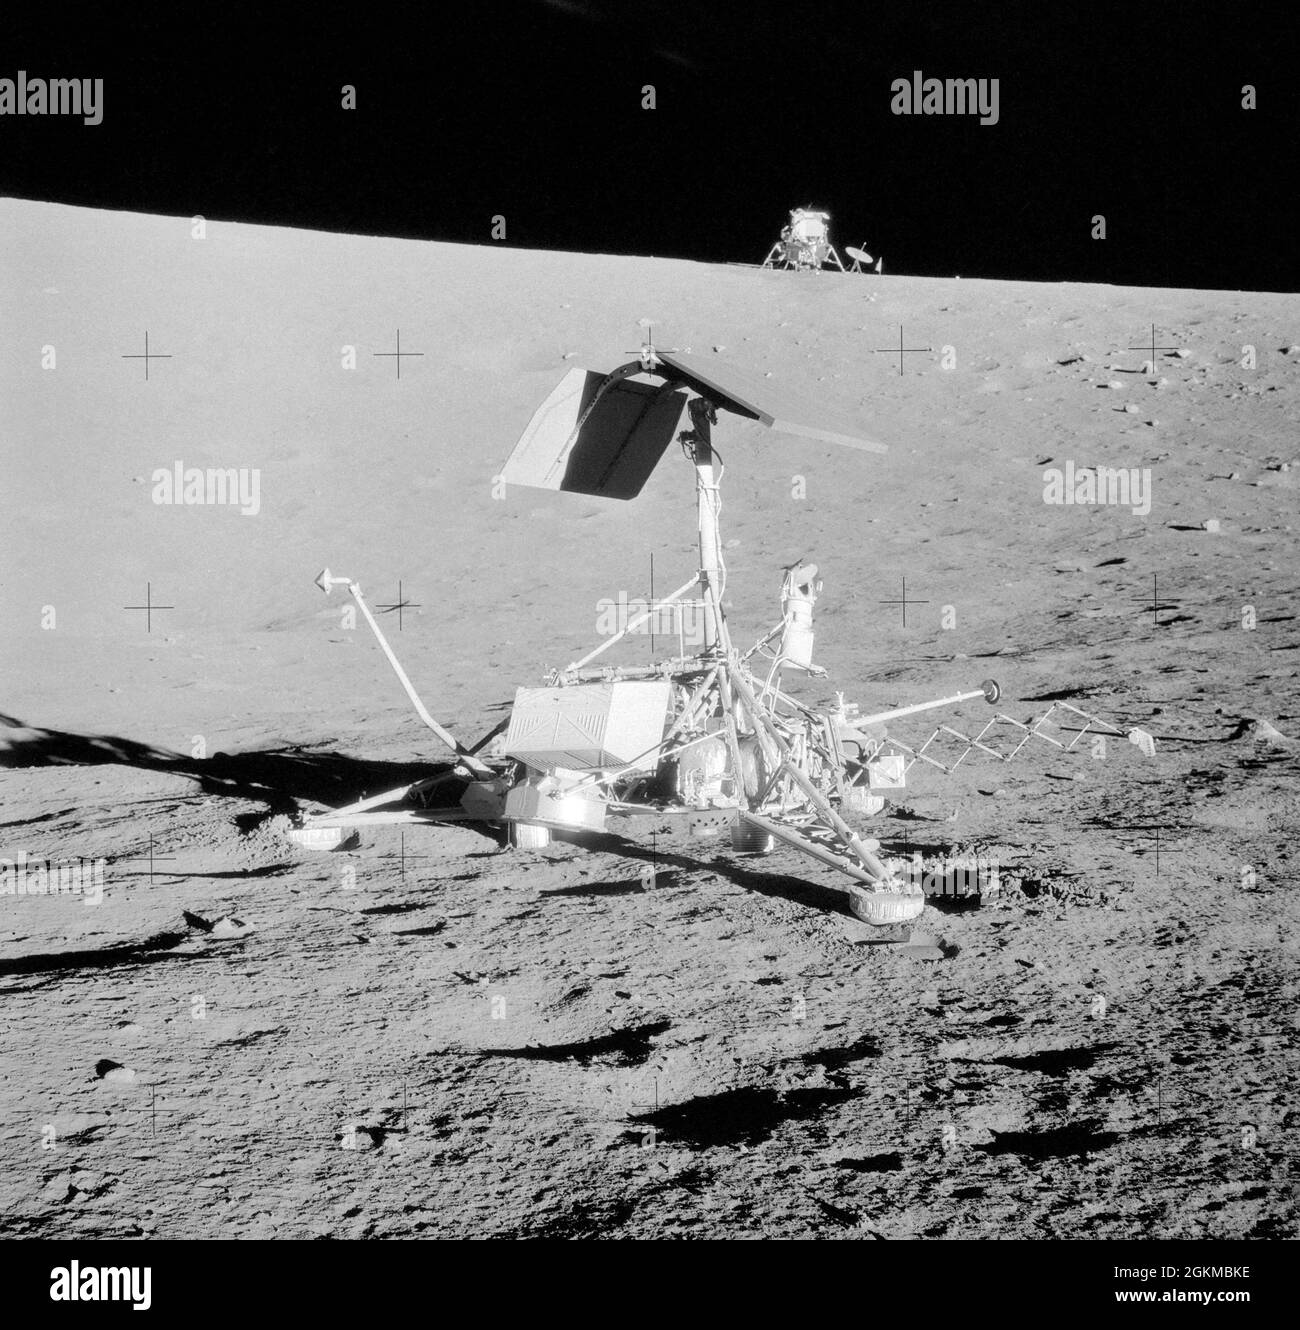 (20 Nov. 1969) --- This unusual view shows two National Aeronautics and Space Administration (NASA) spacecraft on the surface of the moon. In the center foreground is the unmanned Surveyor 3 spacecraft, which soft landed on the lunar surface on April 19, 1967. Just 600 feet away from the Surveyor 3 spacecraft, pictured here in the background, is the Apollo 12 Lunar Module (LM), which landed on the lunar surface on Nov. 19, 1969. This photograph was taken the following day, during the second Apollo 12 extravehicular activity (EVA) in which astronauts Charles Conrad Jr., commander, and Alan L. B Stock Photo